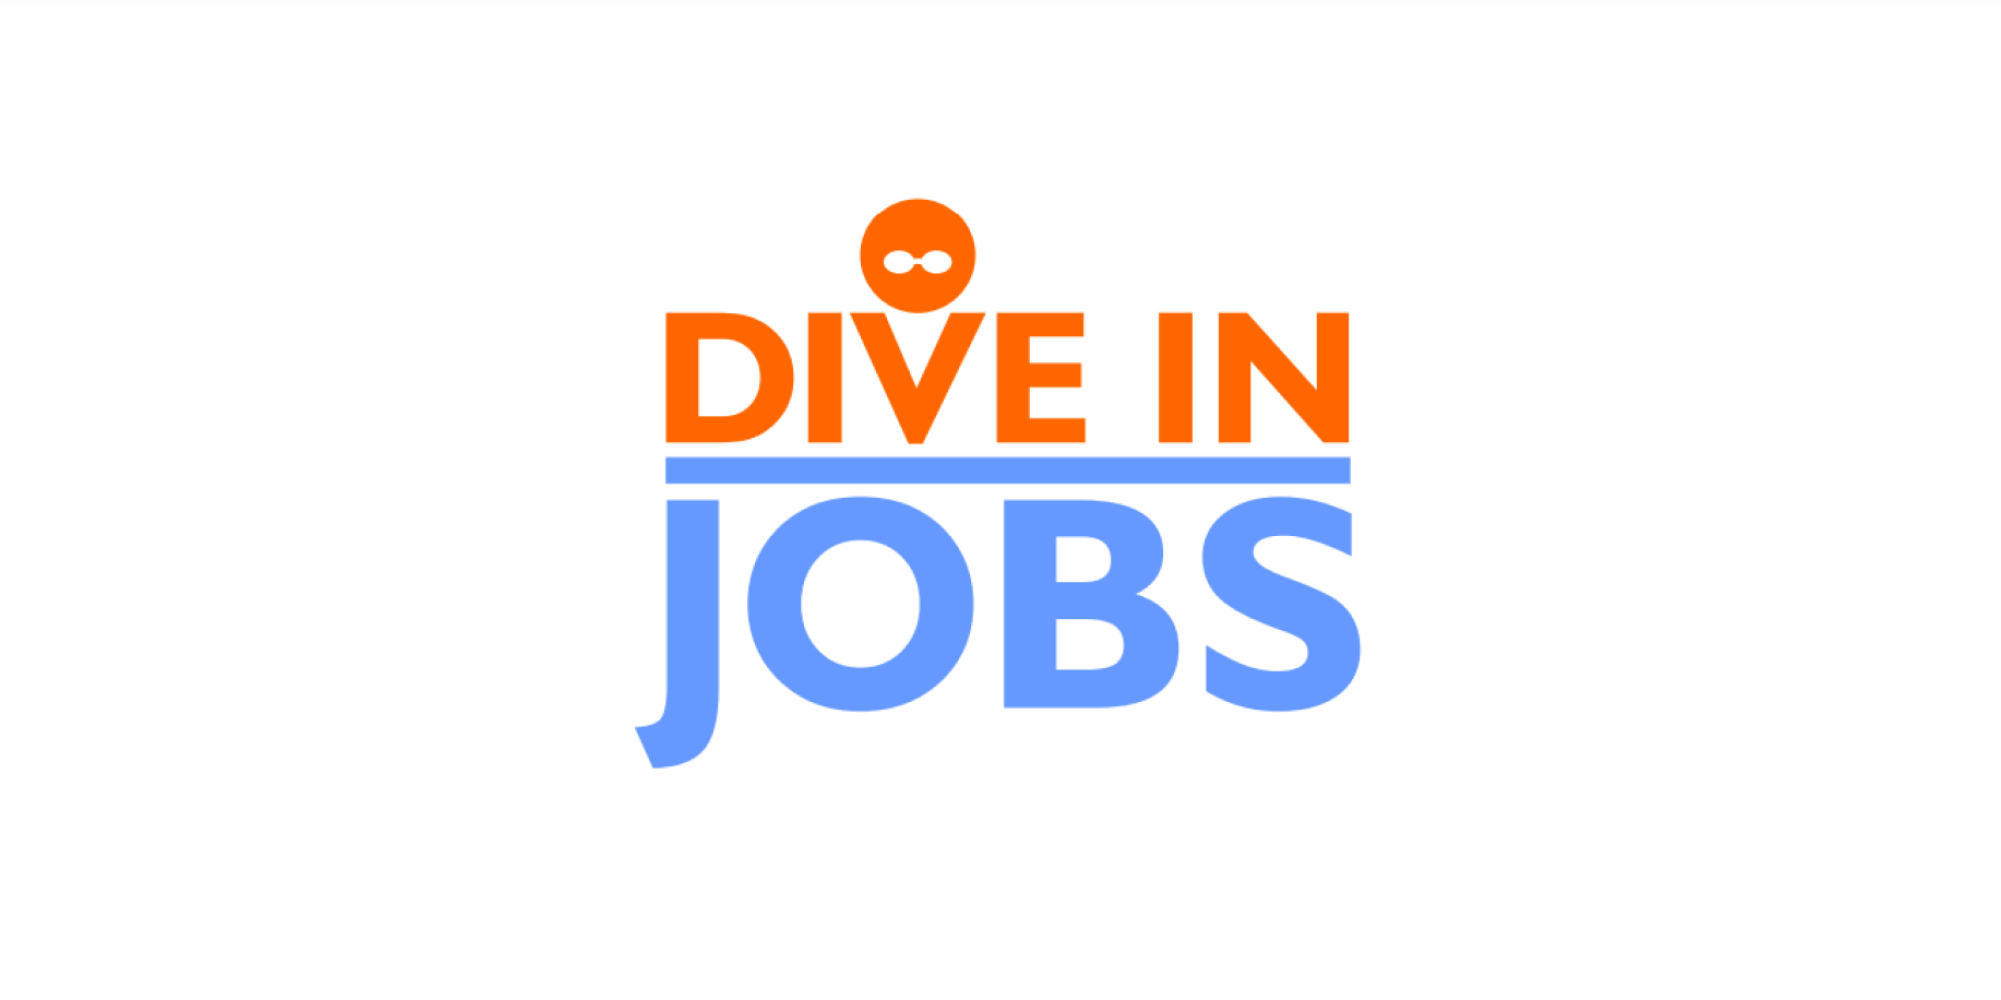 Dive In Jobs Set To Make A Splash As A Games Recruitment Agency For Scotland